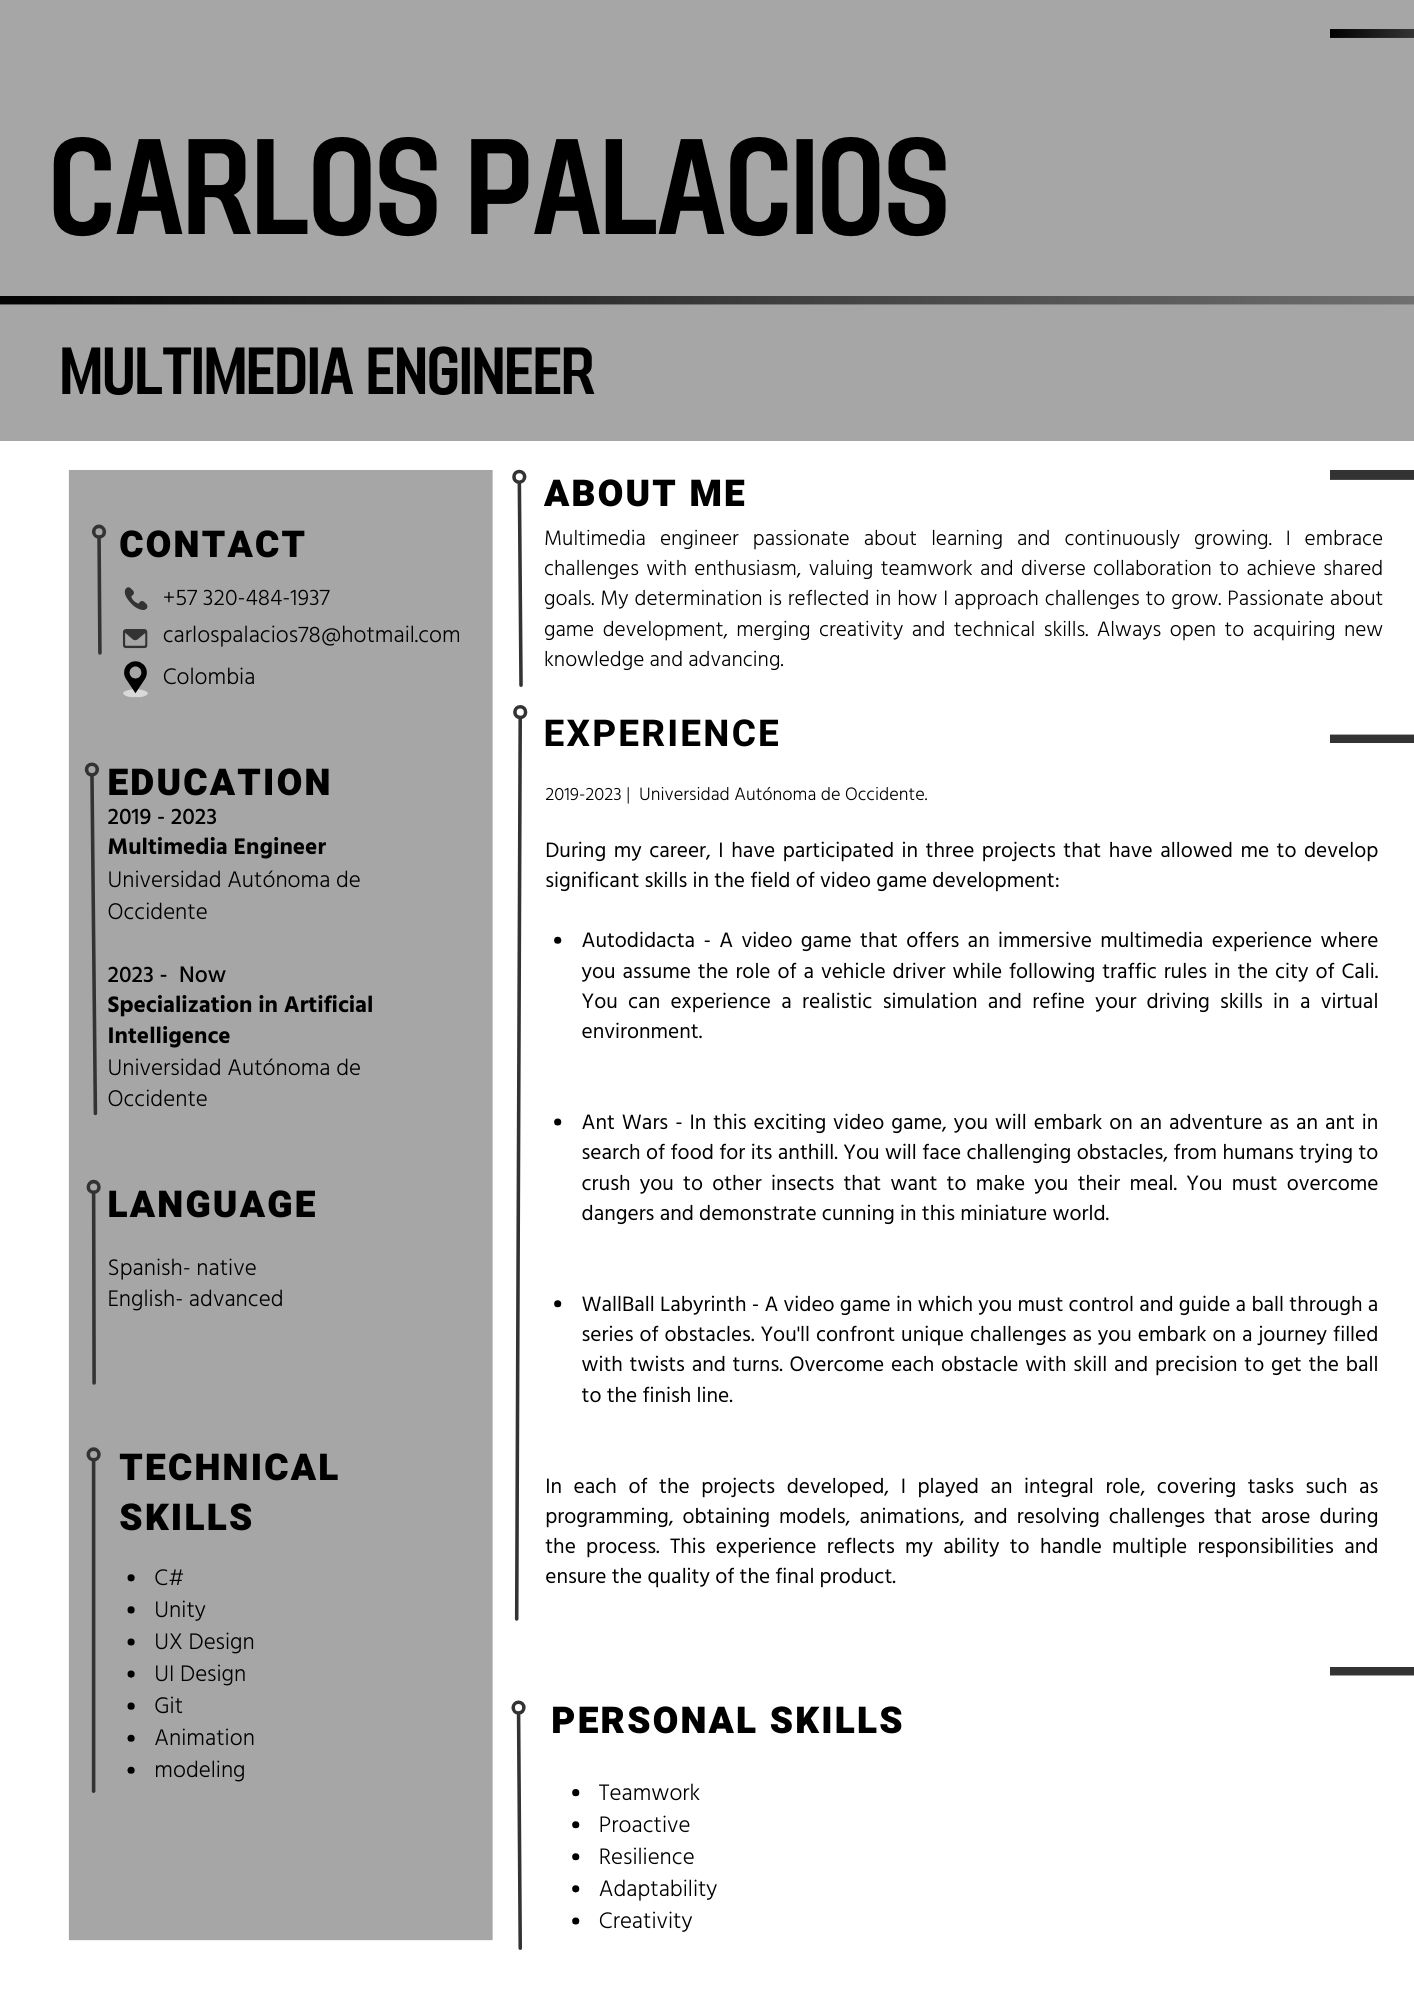 ABOUT ME

Multimedia engineer passionate about learning and continuously growing. | embrace
challenges with enthusiasm, valuing teamwork and diverse collaboration to achieve shared
goals. My determination is reflected in how | approach challenges to grow. Passionate about

game development, merging creativity and technical skills. Always open tc acquiring new
knowledge and advancing

EXPERIENCE

2019-0023 | Un vers dad Autonoma de Occidente

During my career, | have participated in three projects that have allowed me to develop
significant skills in the field of video game development:

Autodidacta - A video game that offers an immersive multimedia experience where
you assume the role of a vehicle driver while following traffic rules in the city of Cali.
You can experience a realistic simulation and refine your driving skills in a virtual
environment.

Ant Wars - In this exciting video game, you will embark on an adventure as an ant in
search of food for its anthill. You will face challenging obstacles, from humans trying to
crush you to other insects that want to make you their meal. You must overcome
dangers and demonstrate cunning in this miniature world.

WallBall Labyninth - A video game in which you must control and guide a ball through a
senes of obstacles. You'll confront unique challenges as you embark on a journey filled
with twists and turns. Overcome each obstacle with skill and precision to get the ball
to the finish line

In each of the projects developed, | played an integral role, covering tasks such as
programming, obtaining models, animations, and resolving challenges that arose during
the process. This experience reflects my ability to handle multiple responsibilities and
ensure the quality of the final product.

PERSONAL SKILLS

Teamwork
Proactive
Resilience
Adaptability
Creativity